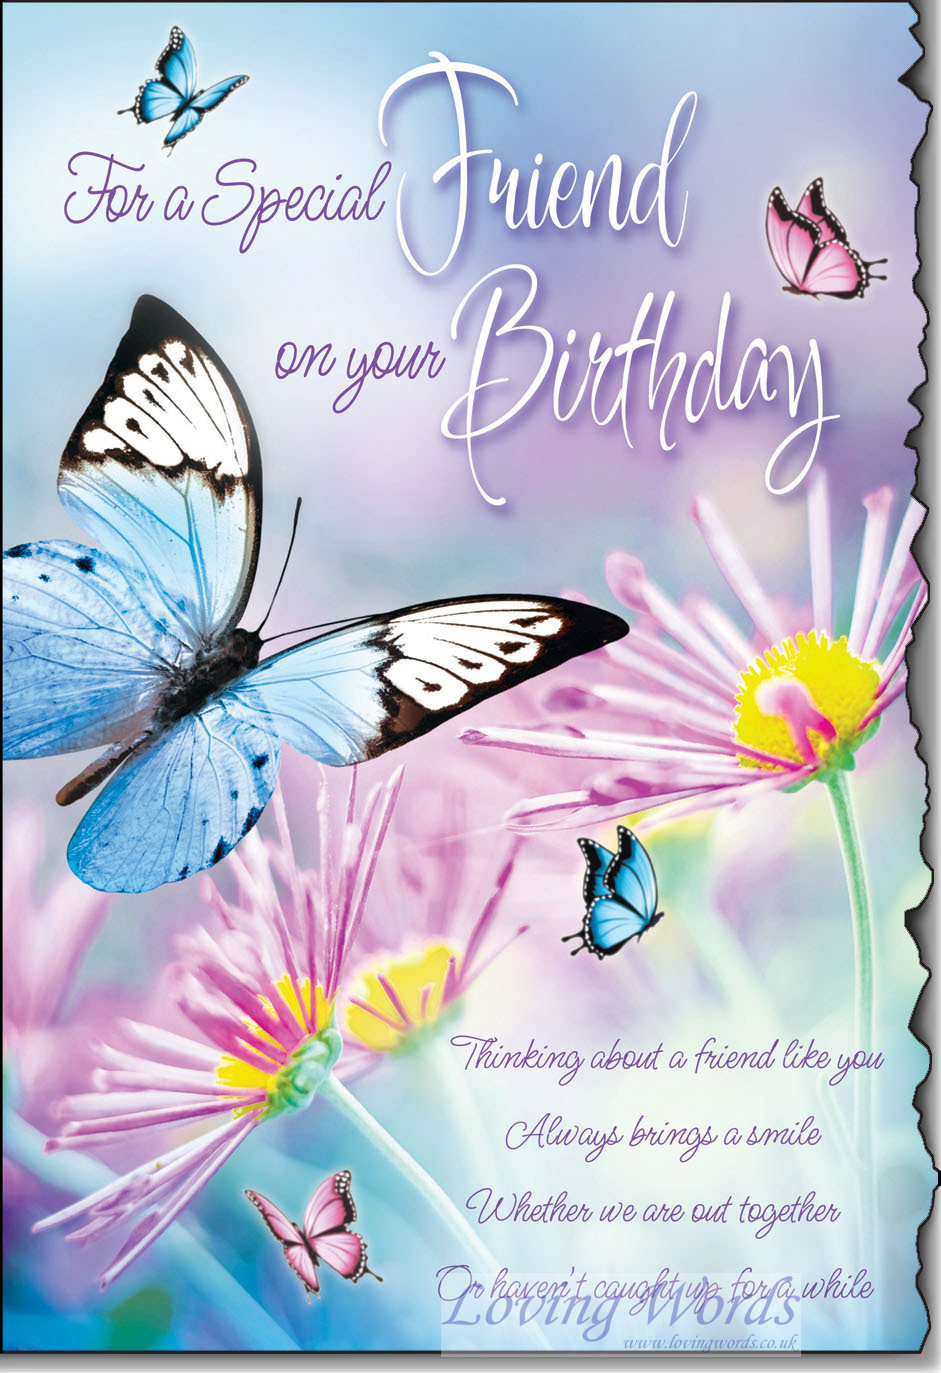 Friend Birthday | Greeting Cards by Loving Words